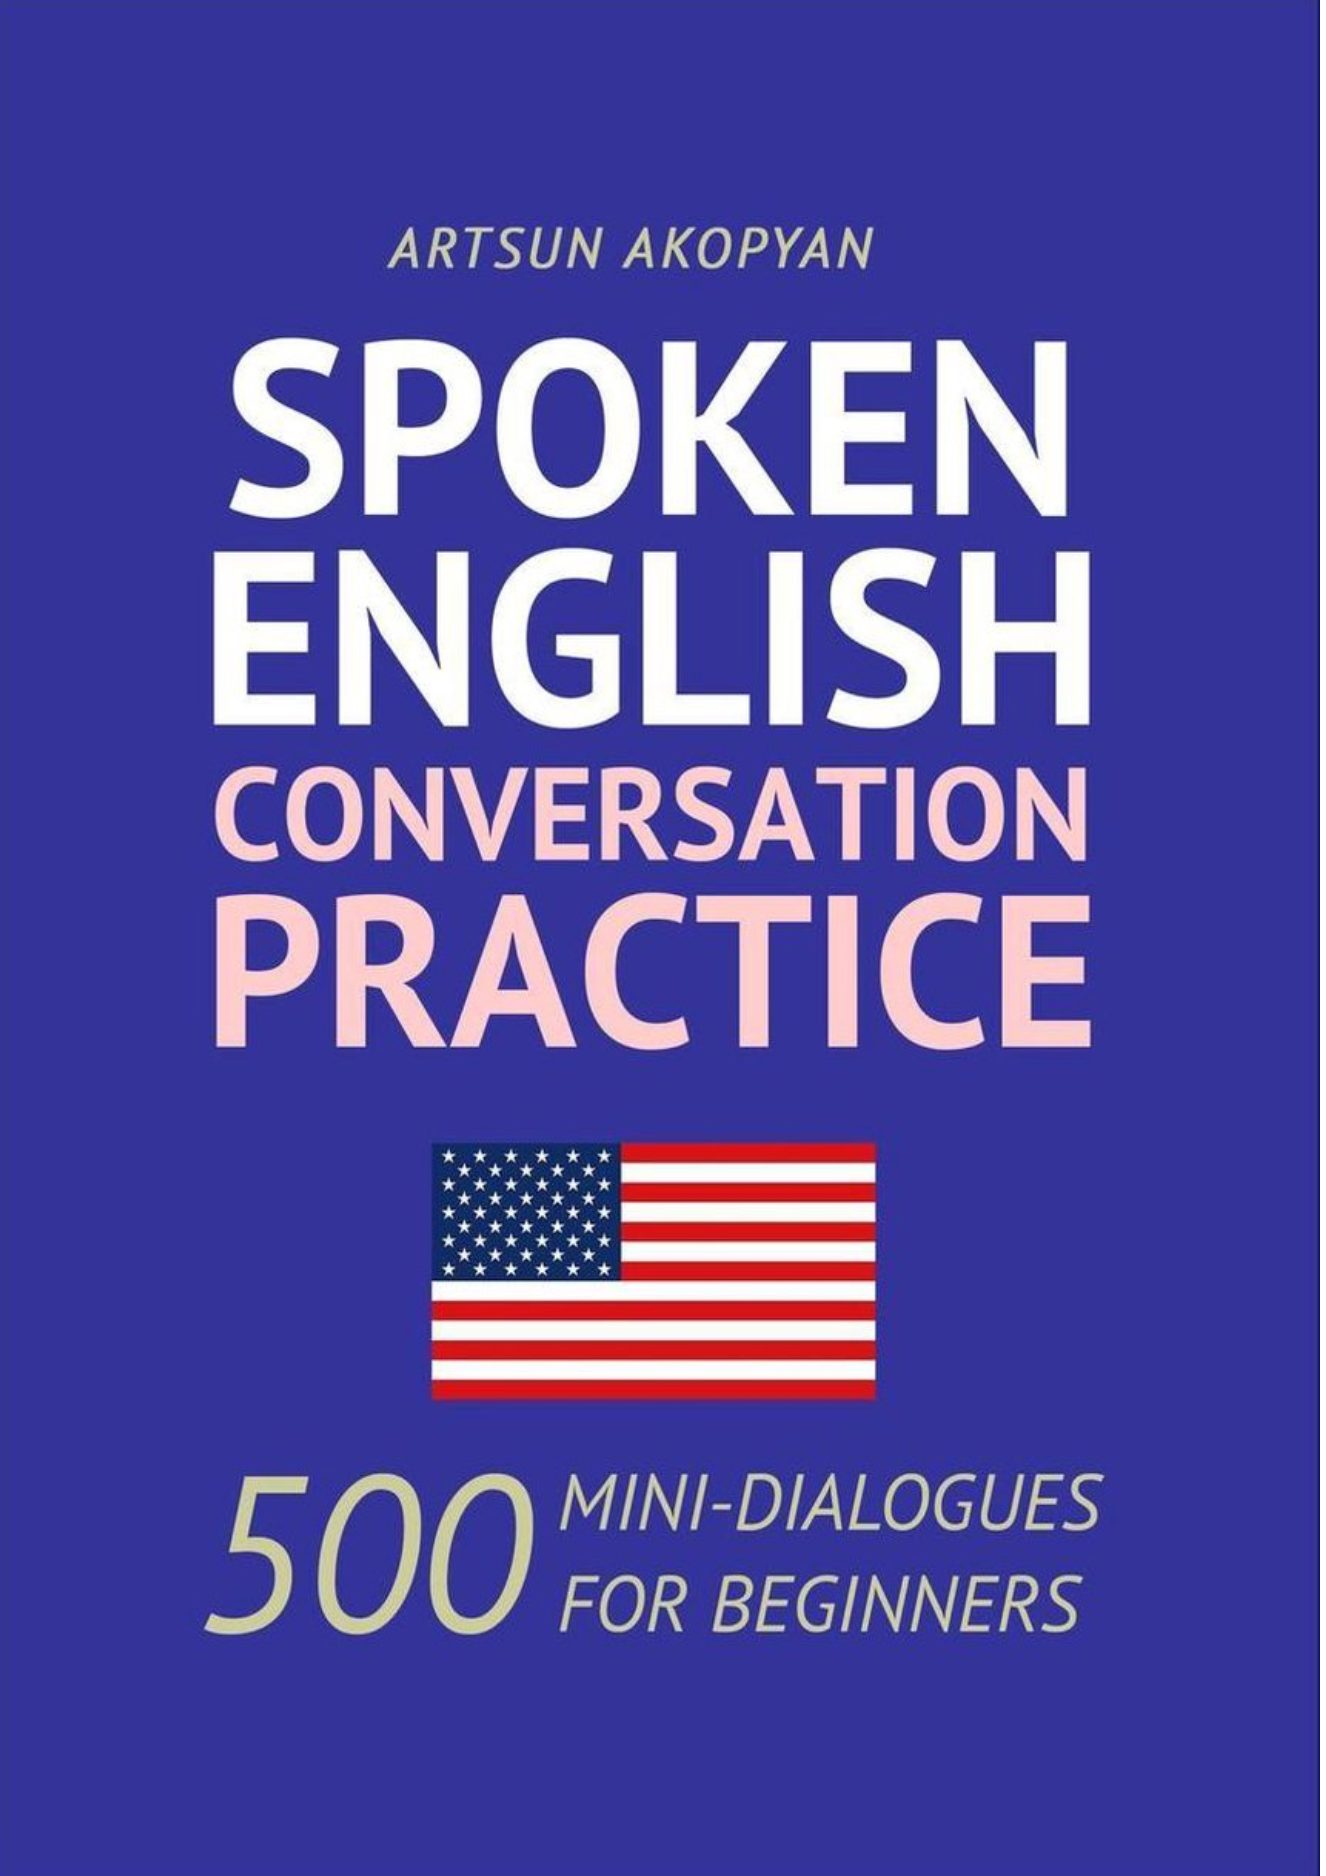 Speaking English Practice conversation книга. Dialogues for Beginners. Dialog English for Beginners. Conversation practice